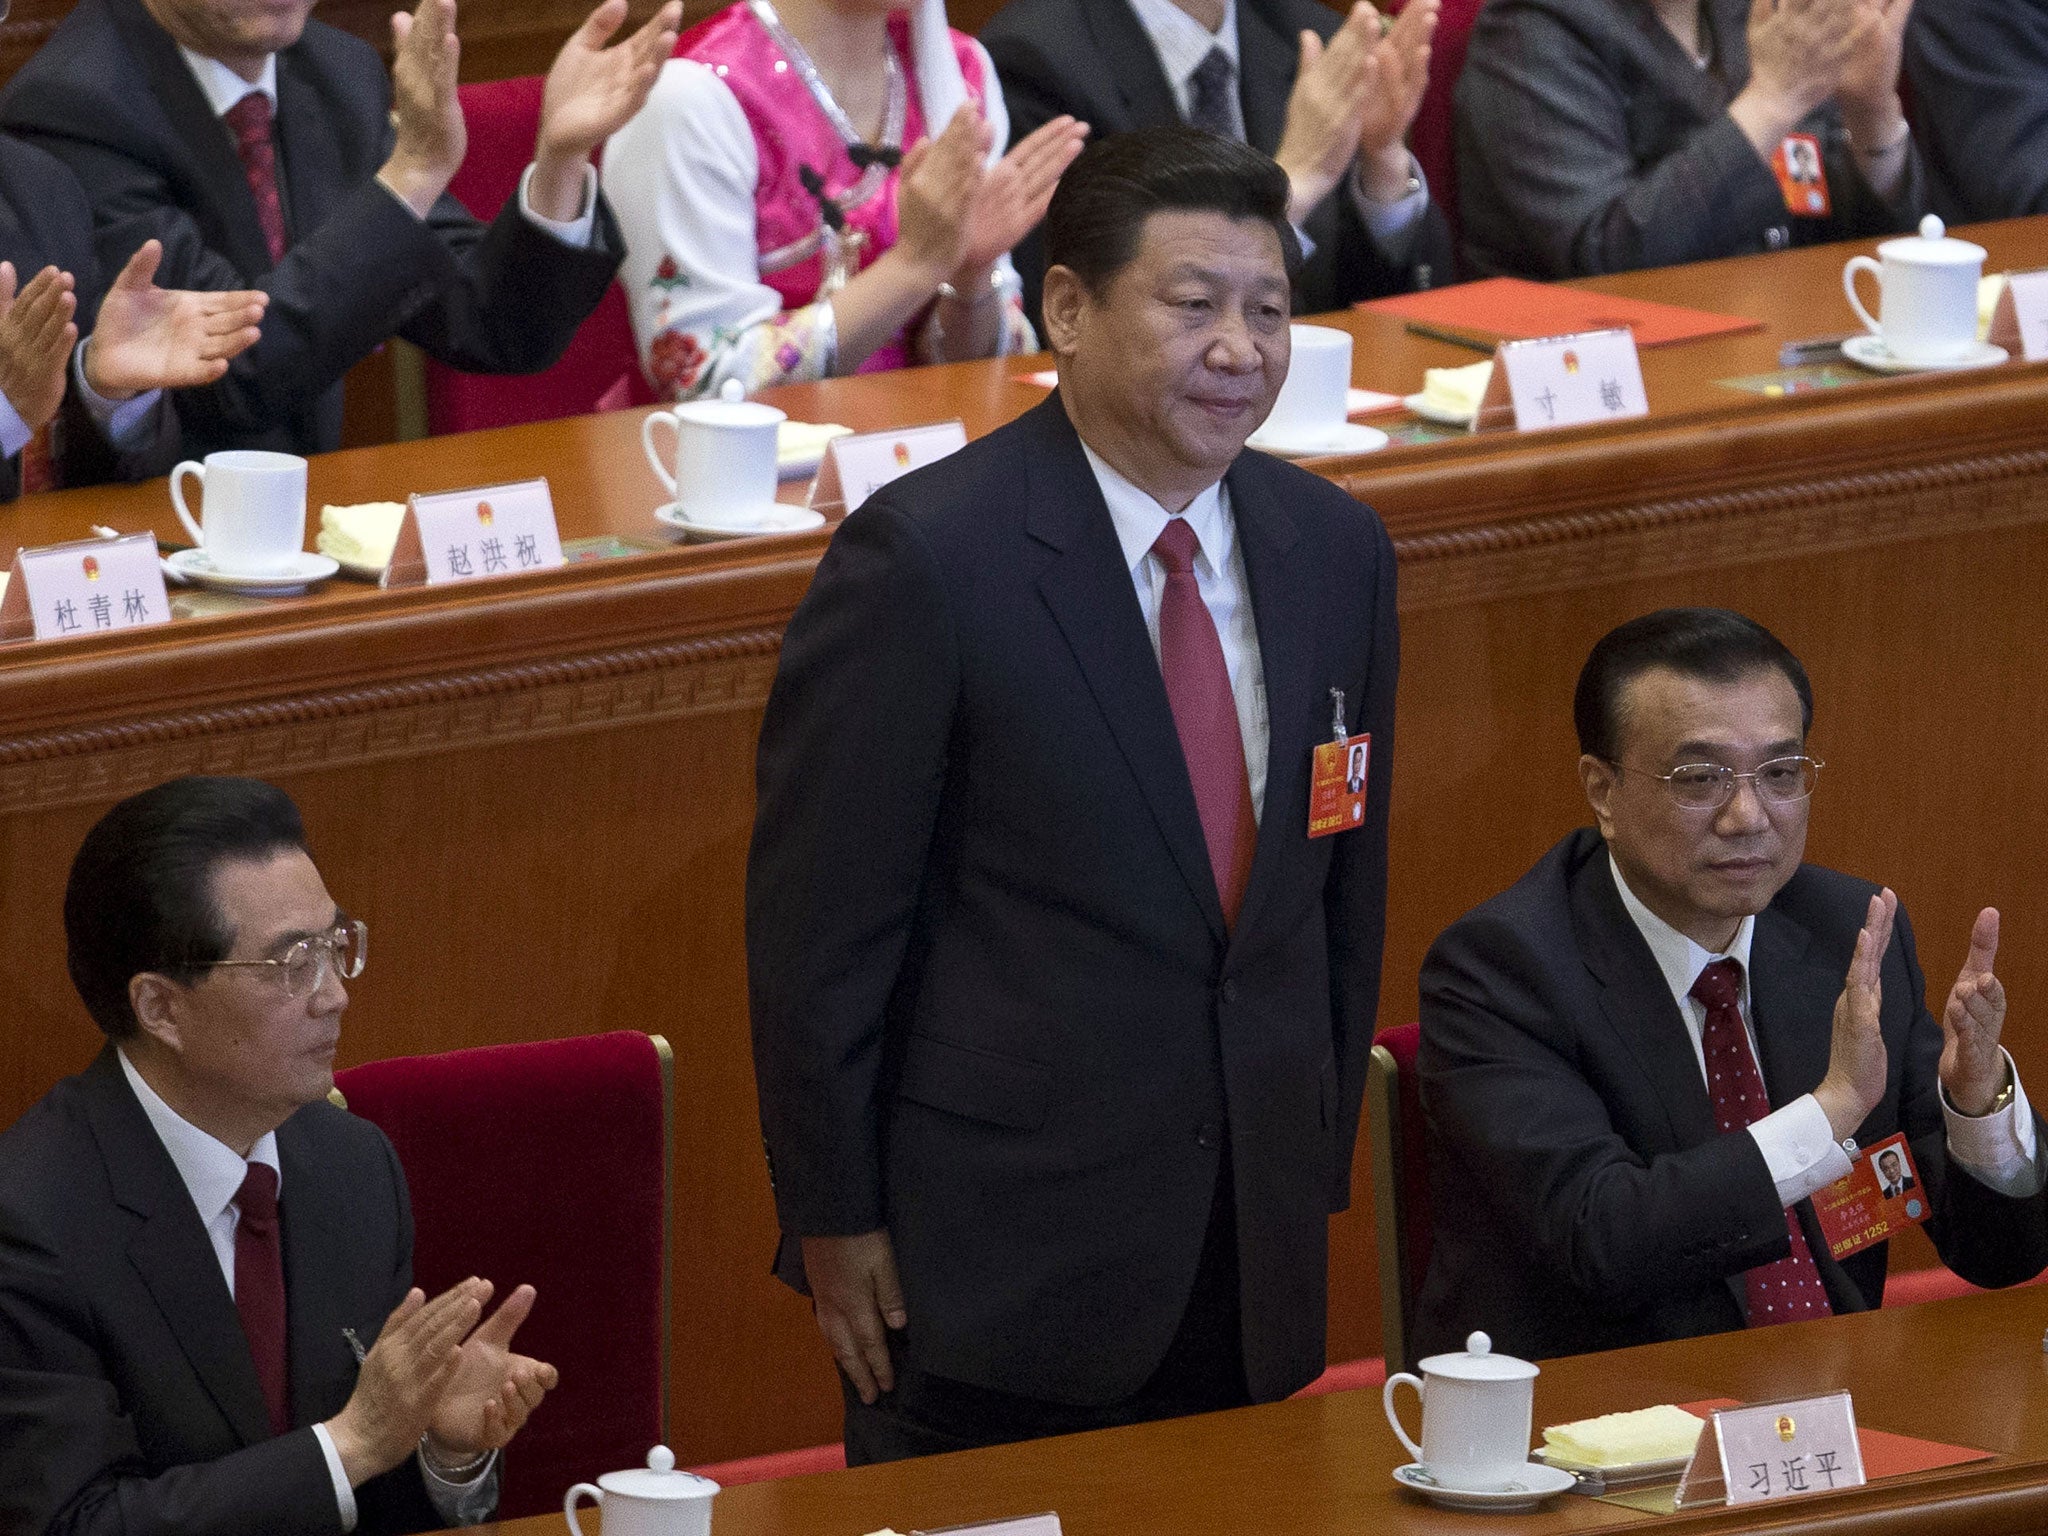 President Xi Jinping, front row centre, stands up as he is formally elected